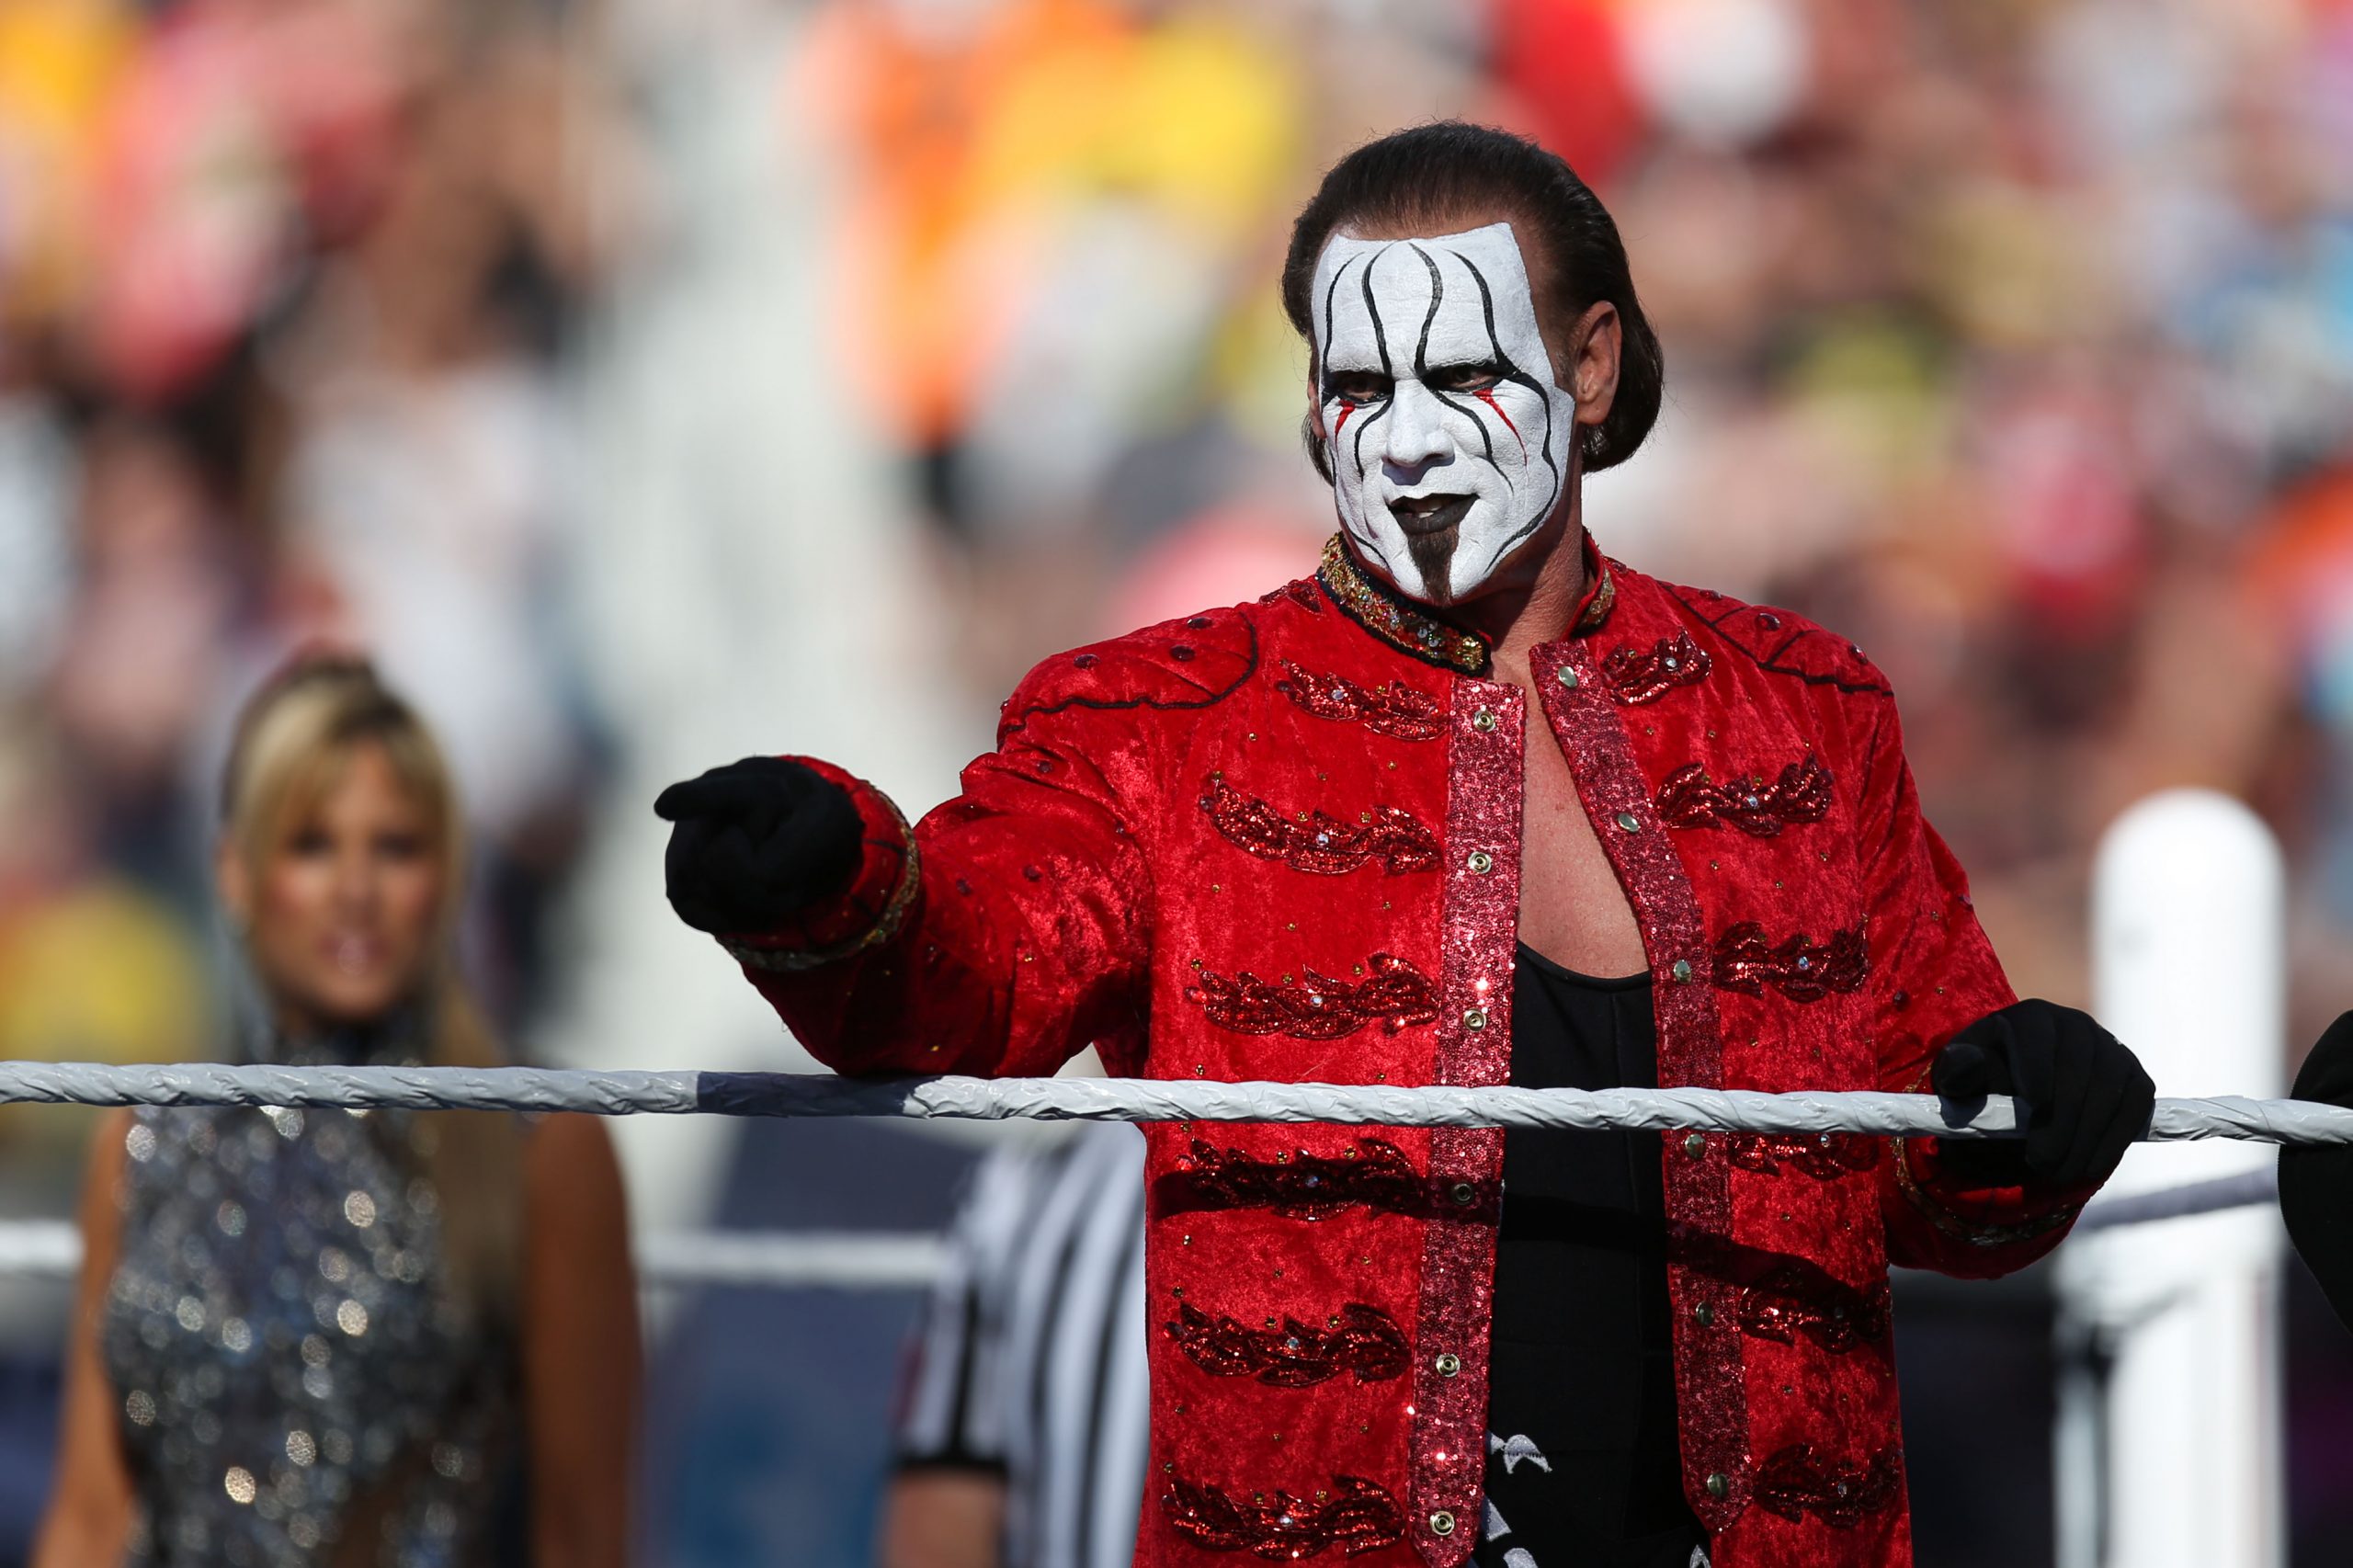 POST NEWS UPDATE: Sting no longer under contract with WWE, per report - POS...